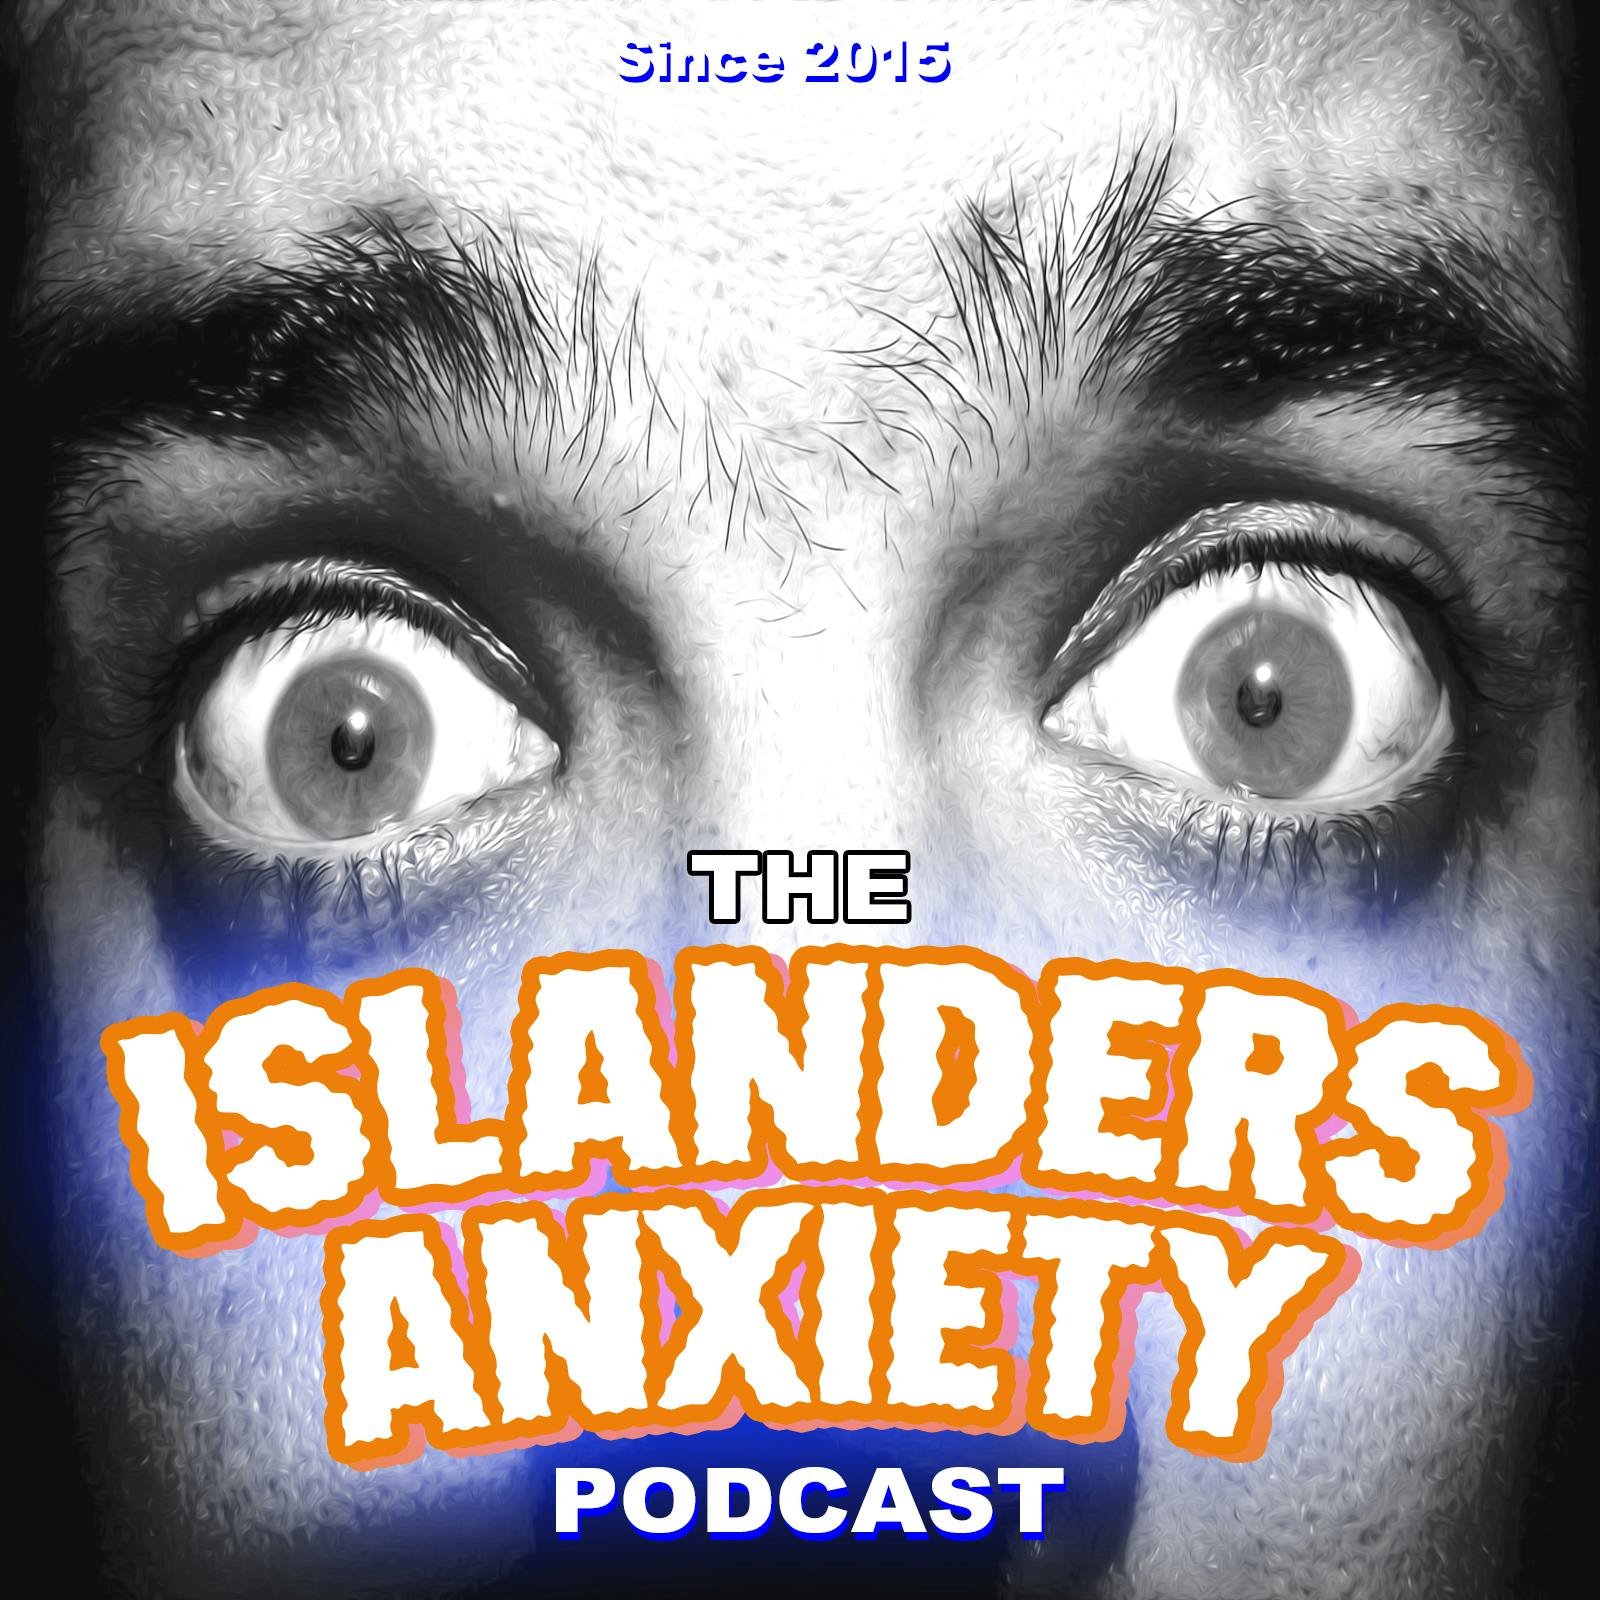 Islanders Anxiety - Episode 259 - Good, Bad and Resilient